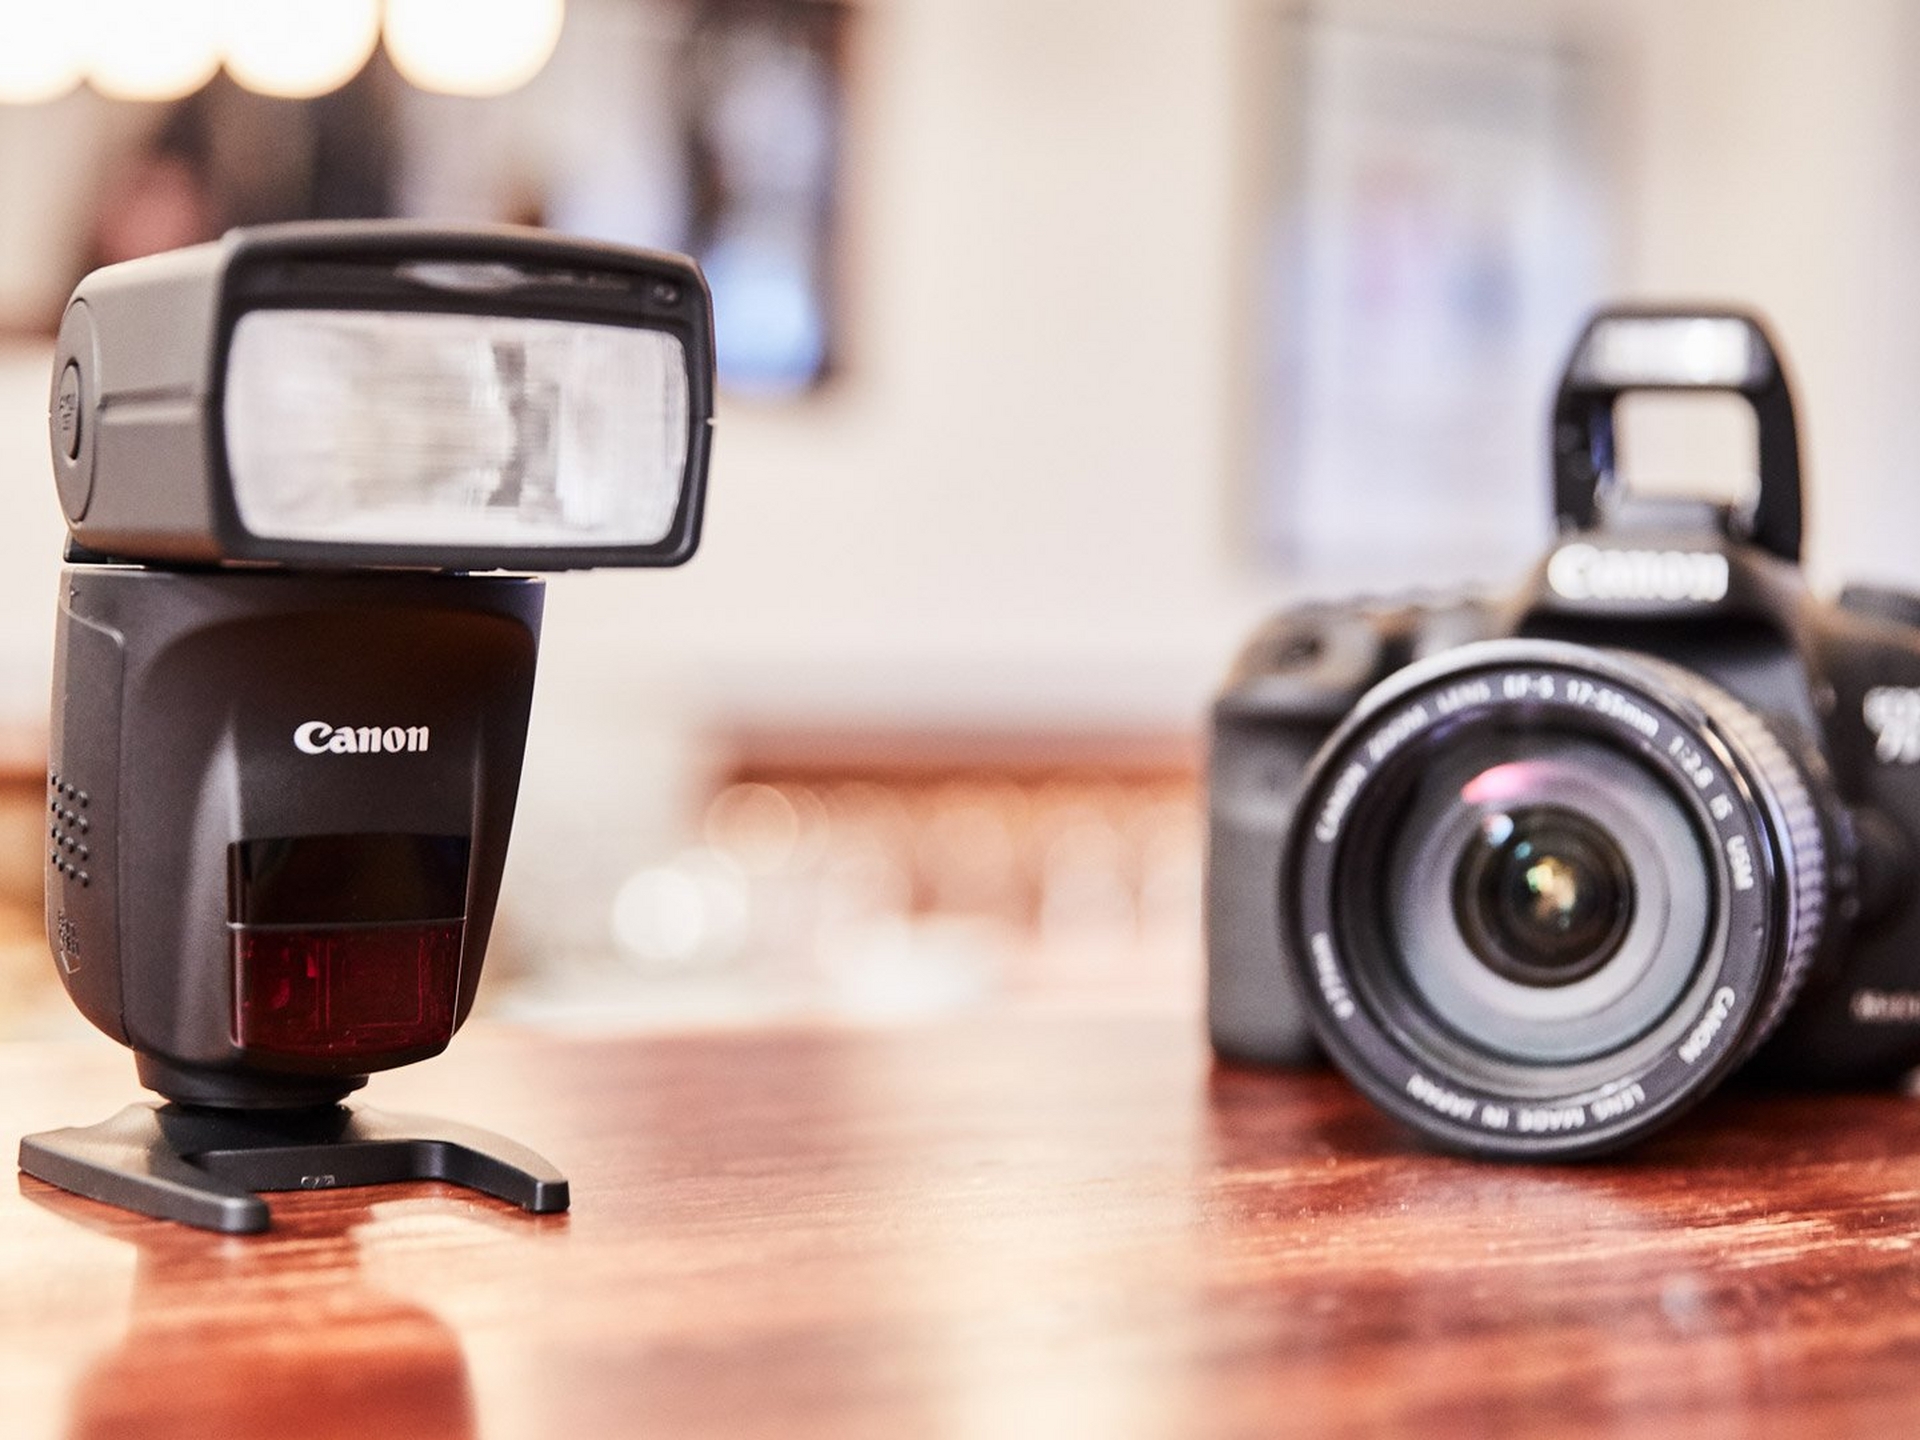 Canon 6D Mark II and Canon Speedlite 470EX-AI on a brown table